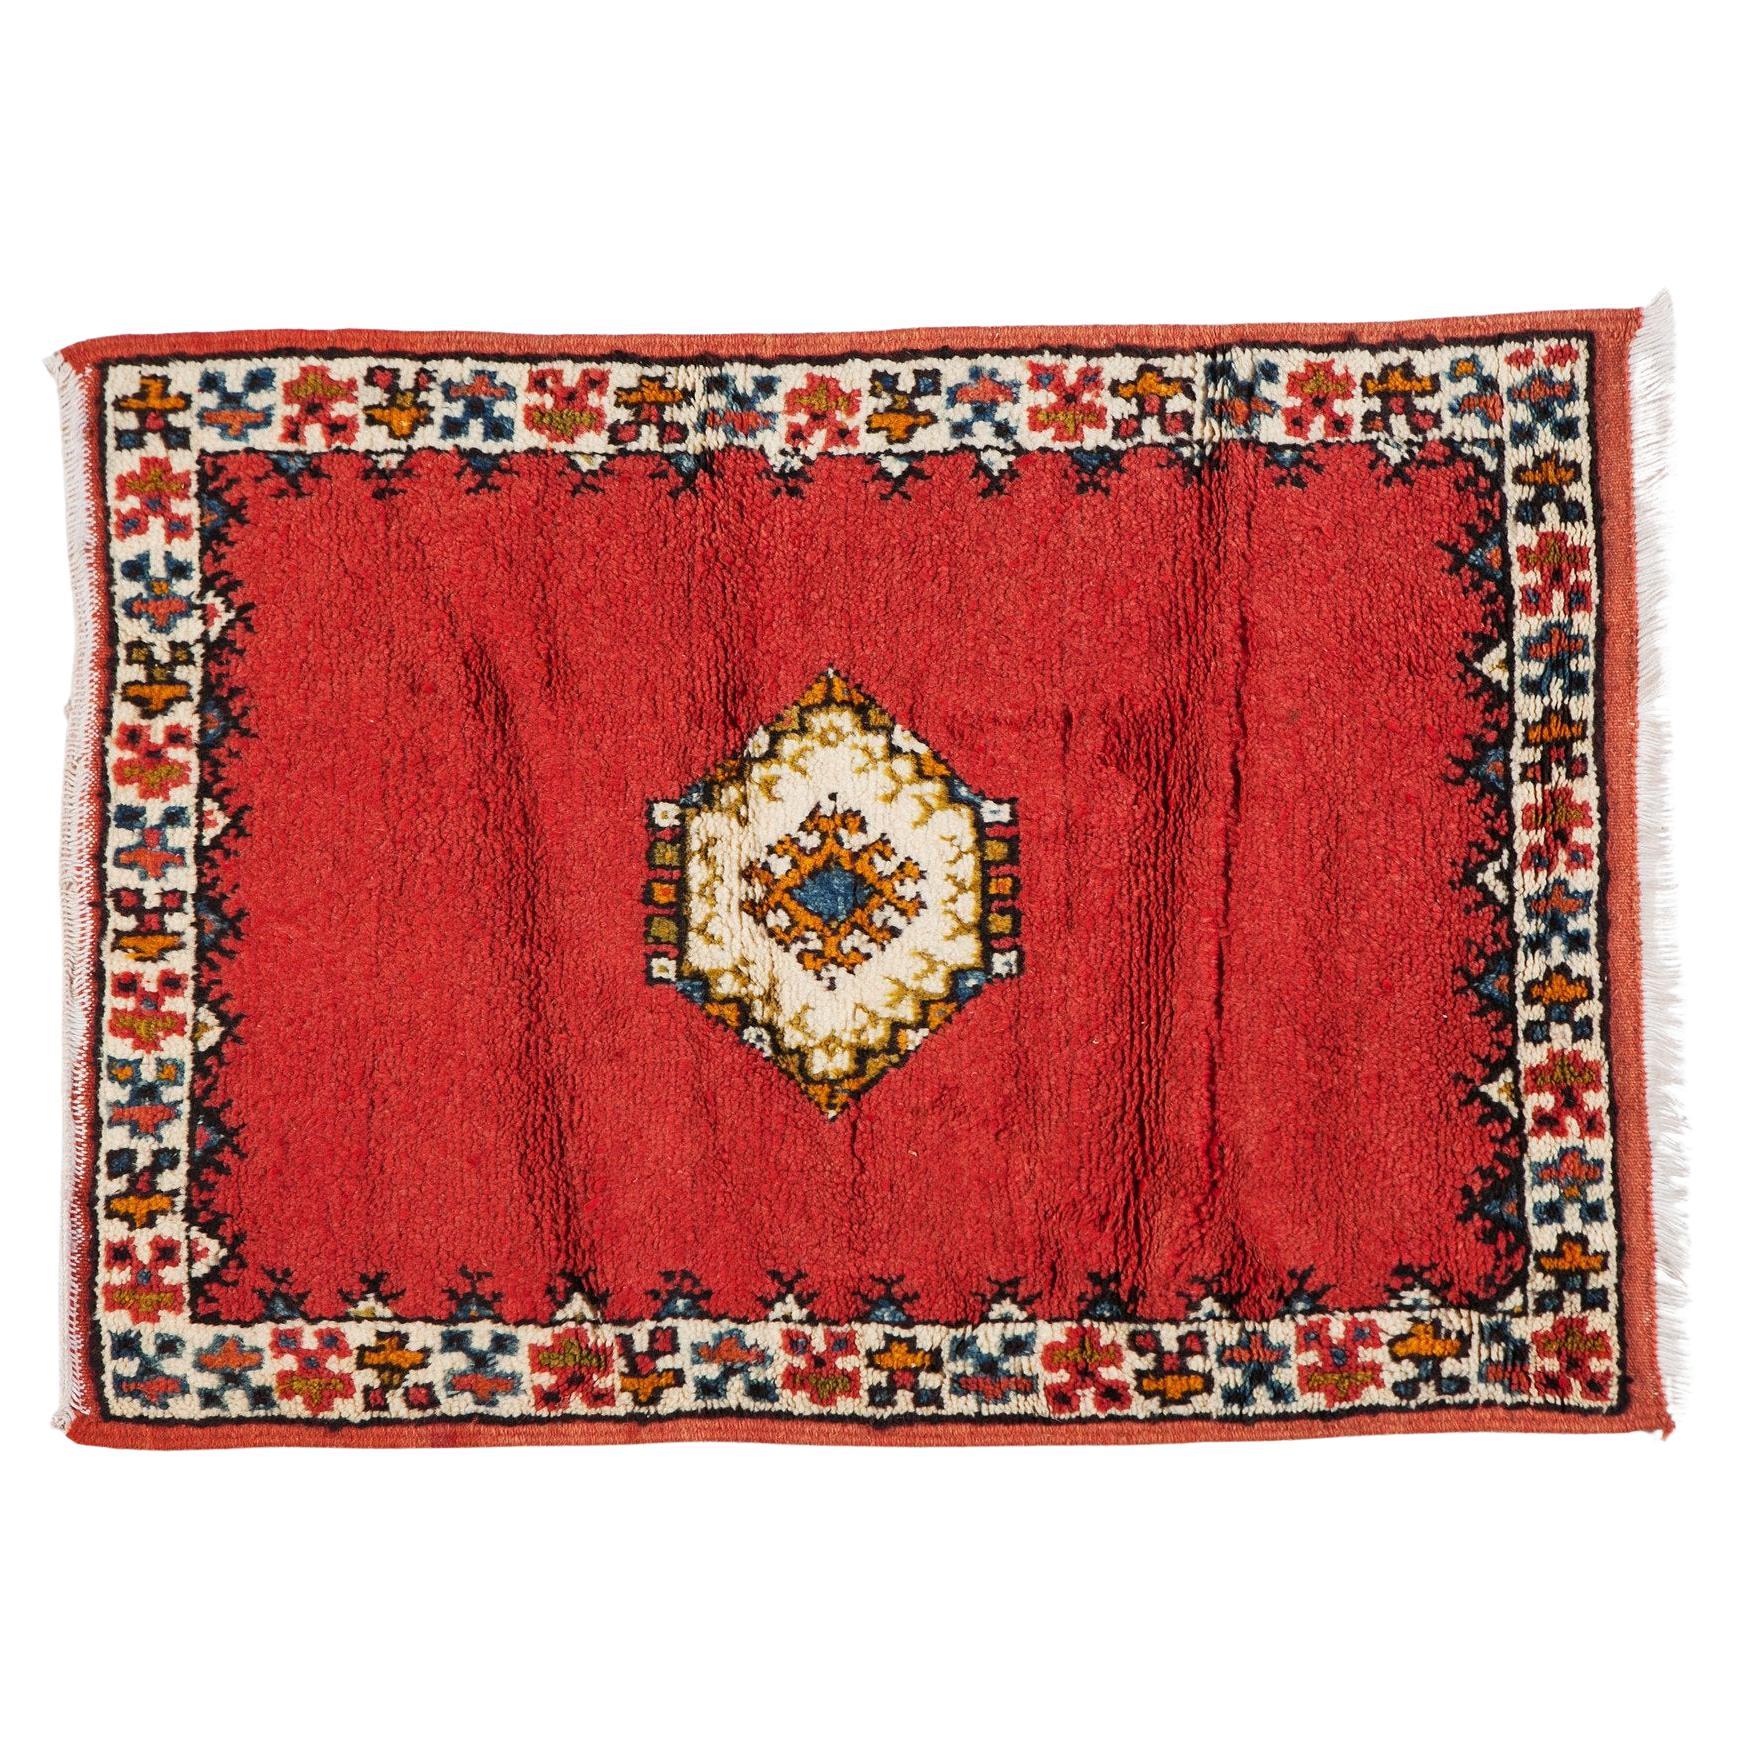 Tribal Moroccan Red Handwoven Rug or Carpet with Diamond Design For Sale